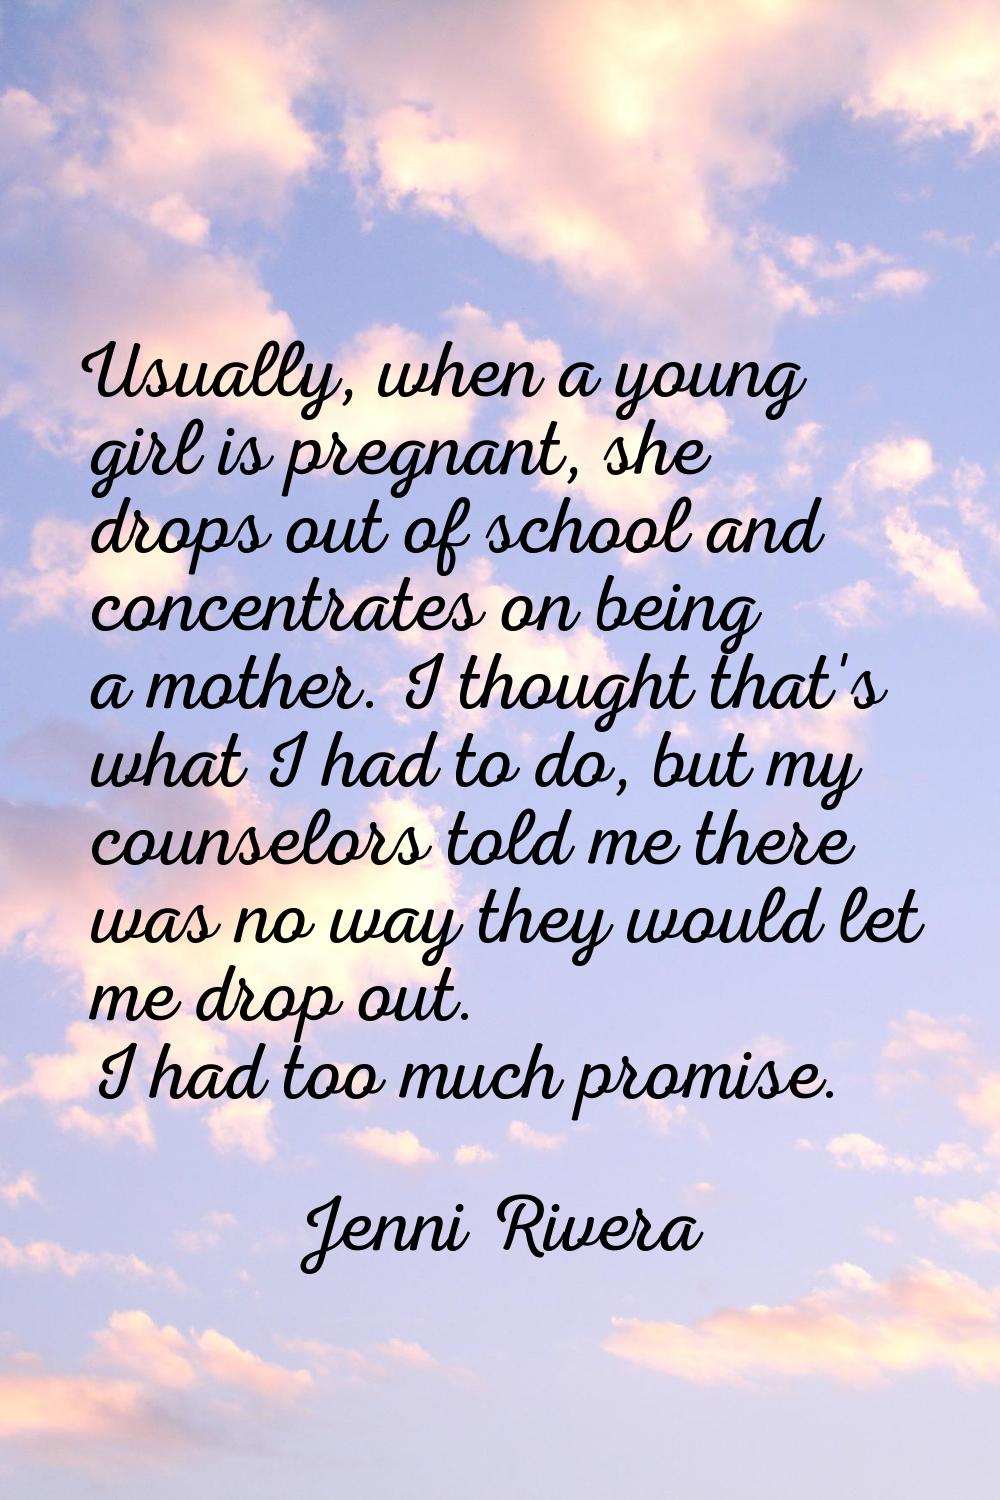 Usually, when a young girl is pregnant, she drops out of school and concentrates on being a mother.